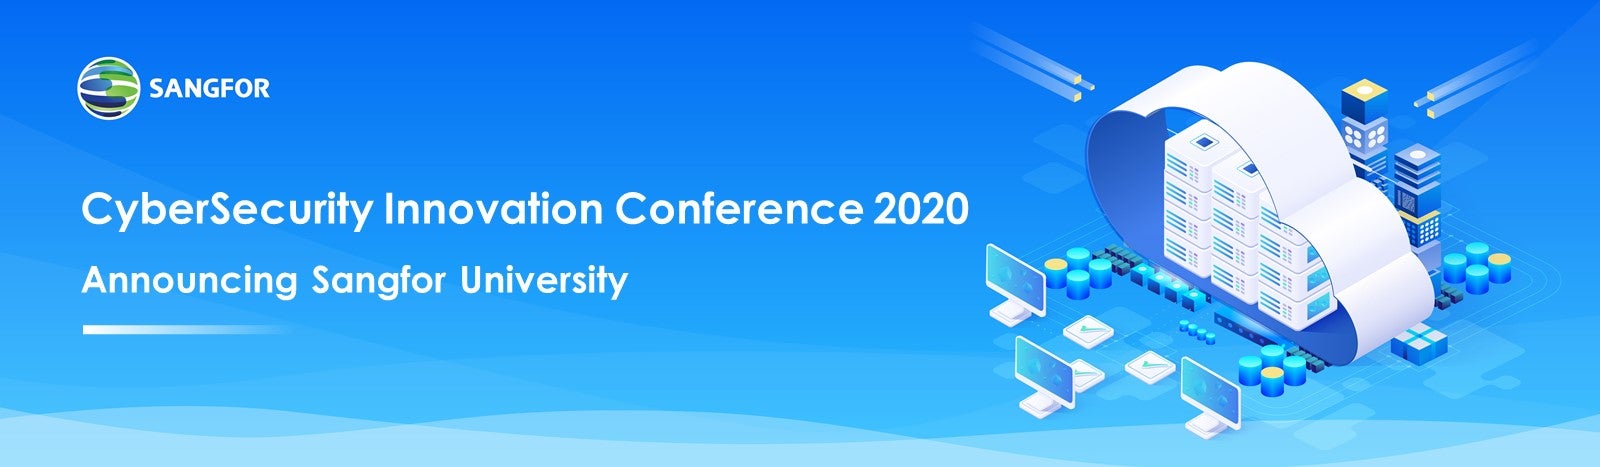 Cybersecurity Innovation Conference 2020 1